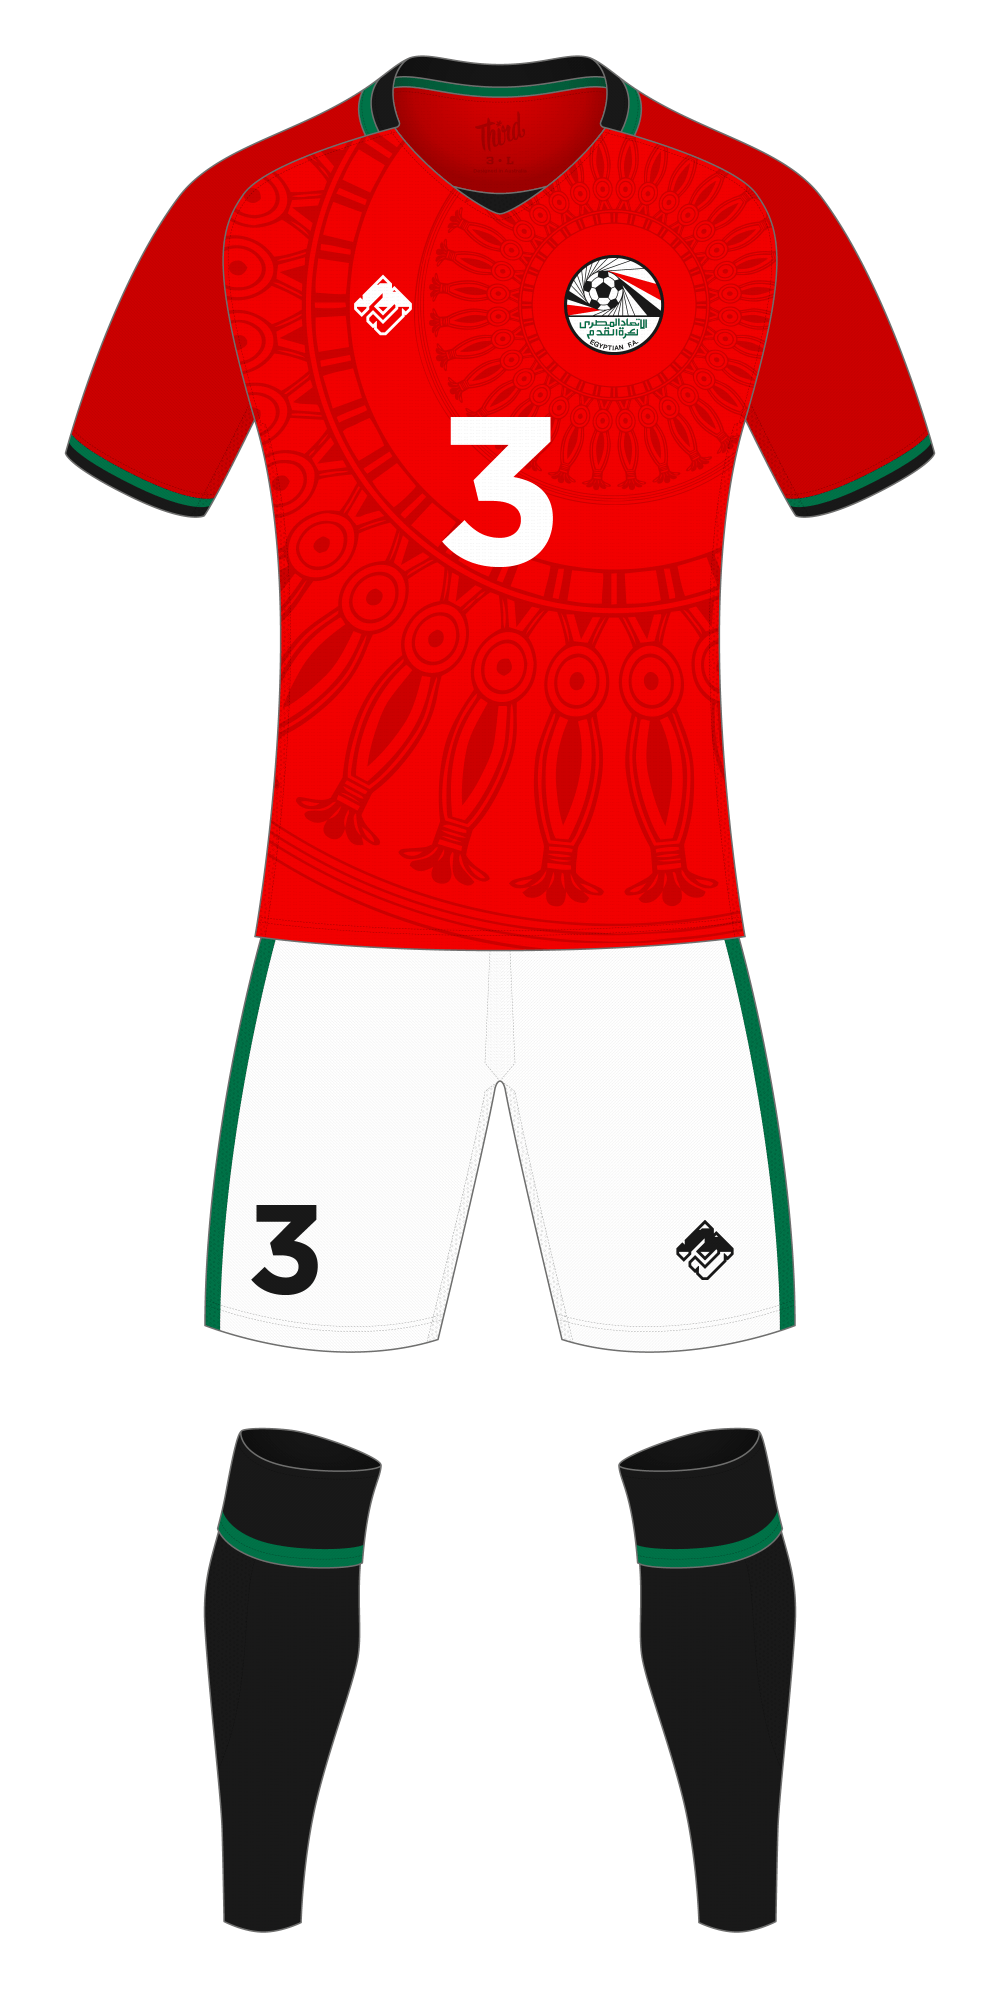 Egypt World Cup 2018 concept